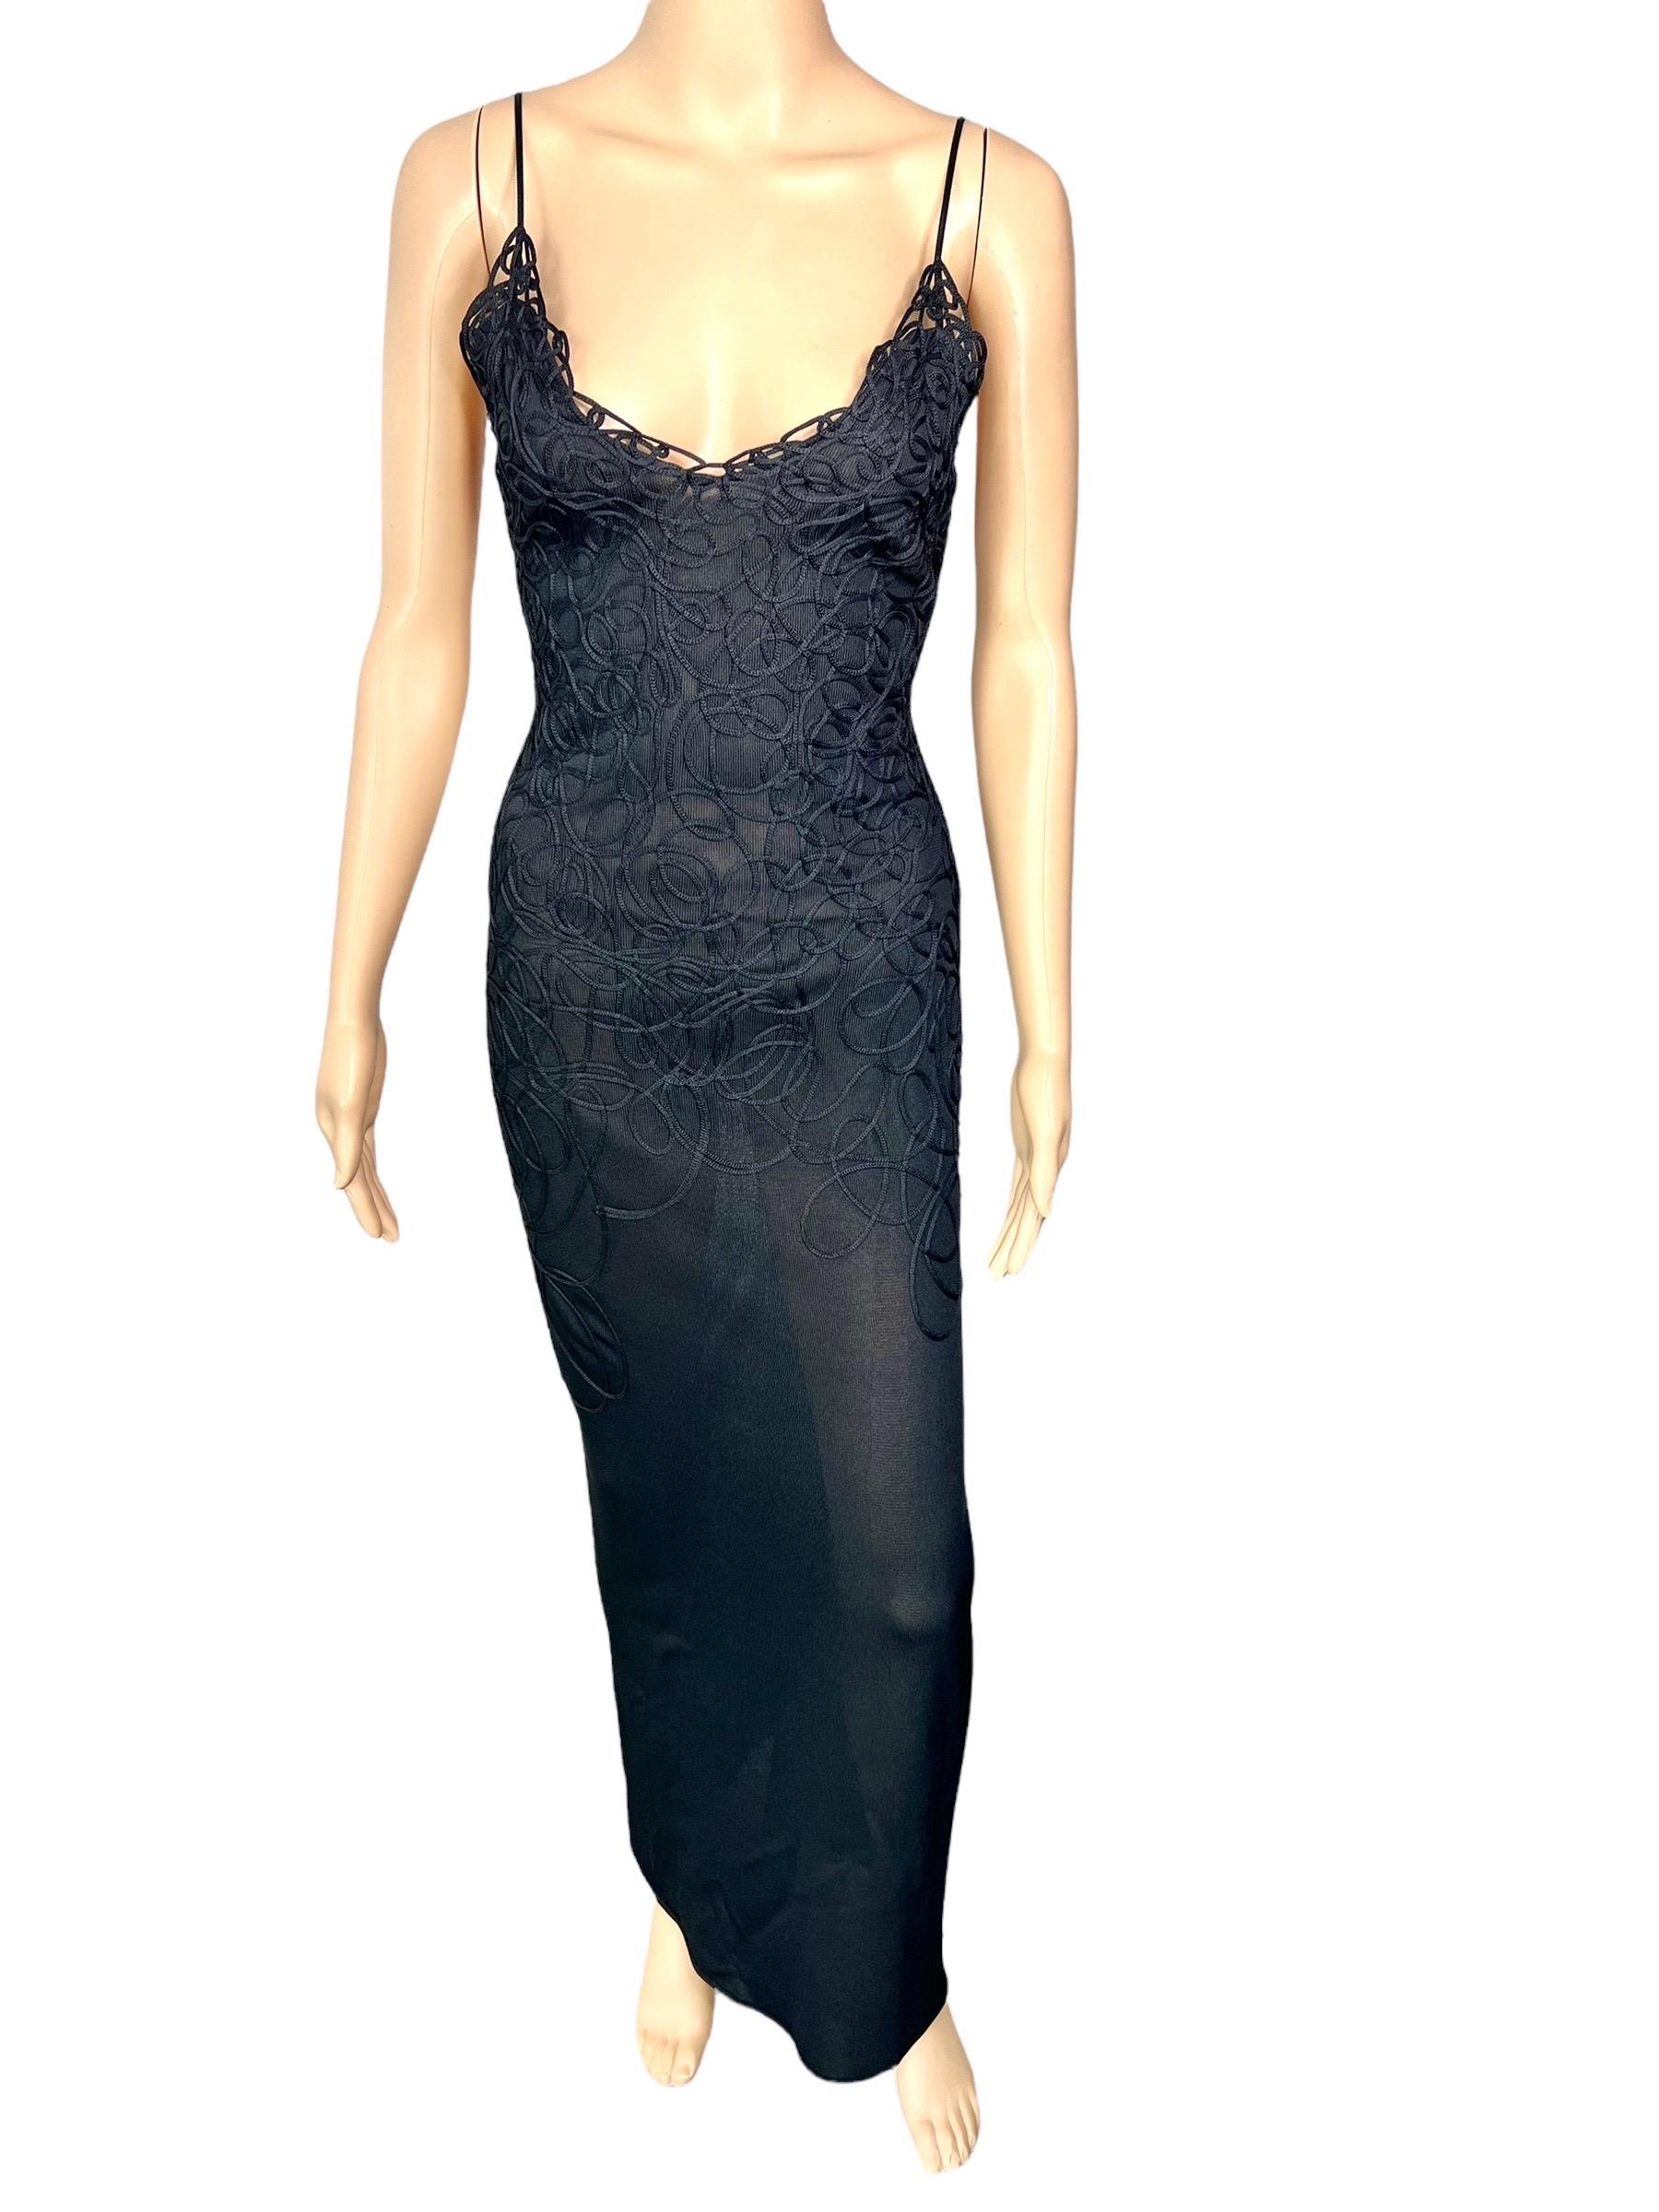 Thierry Mugler Vintage Embroidered Semi-Sheer Knit Bodycon Black Maxi Dress  1